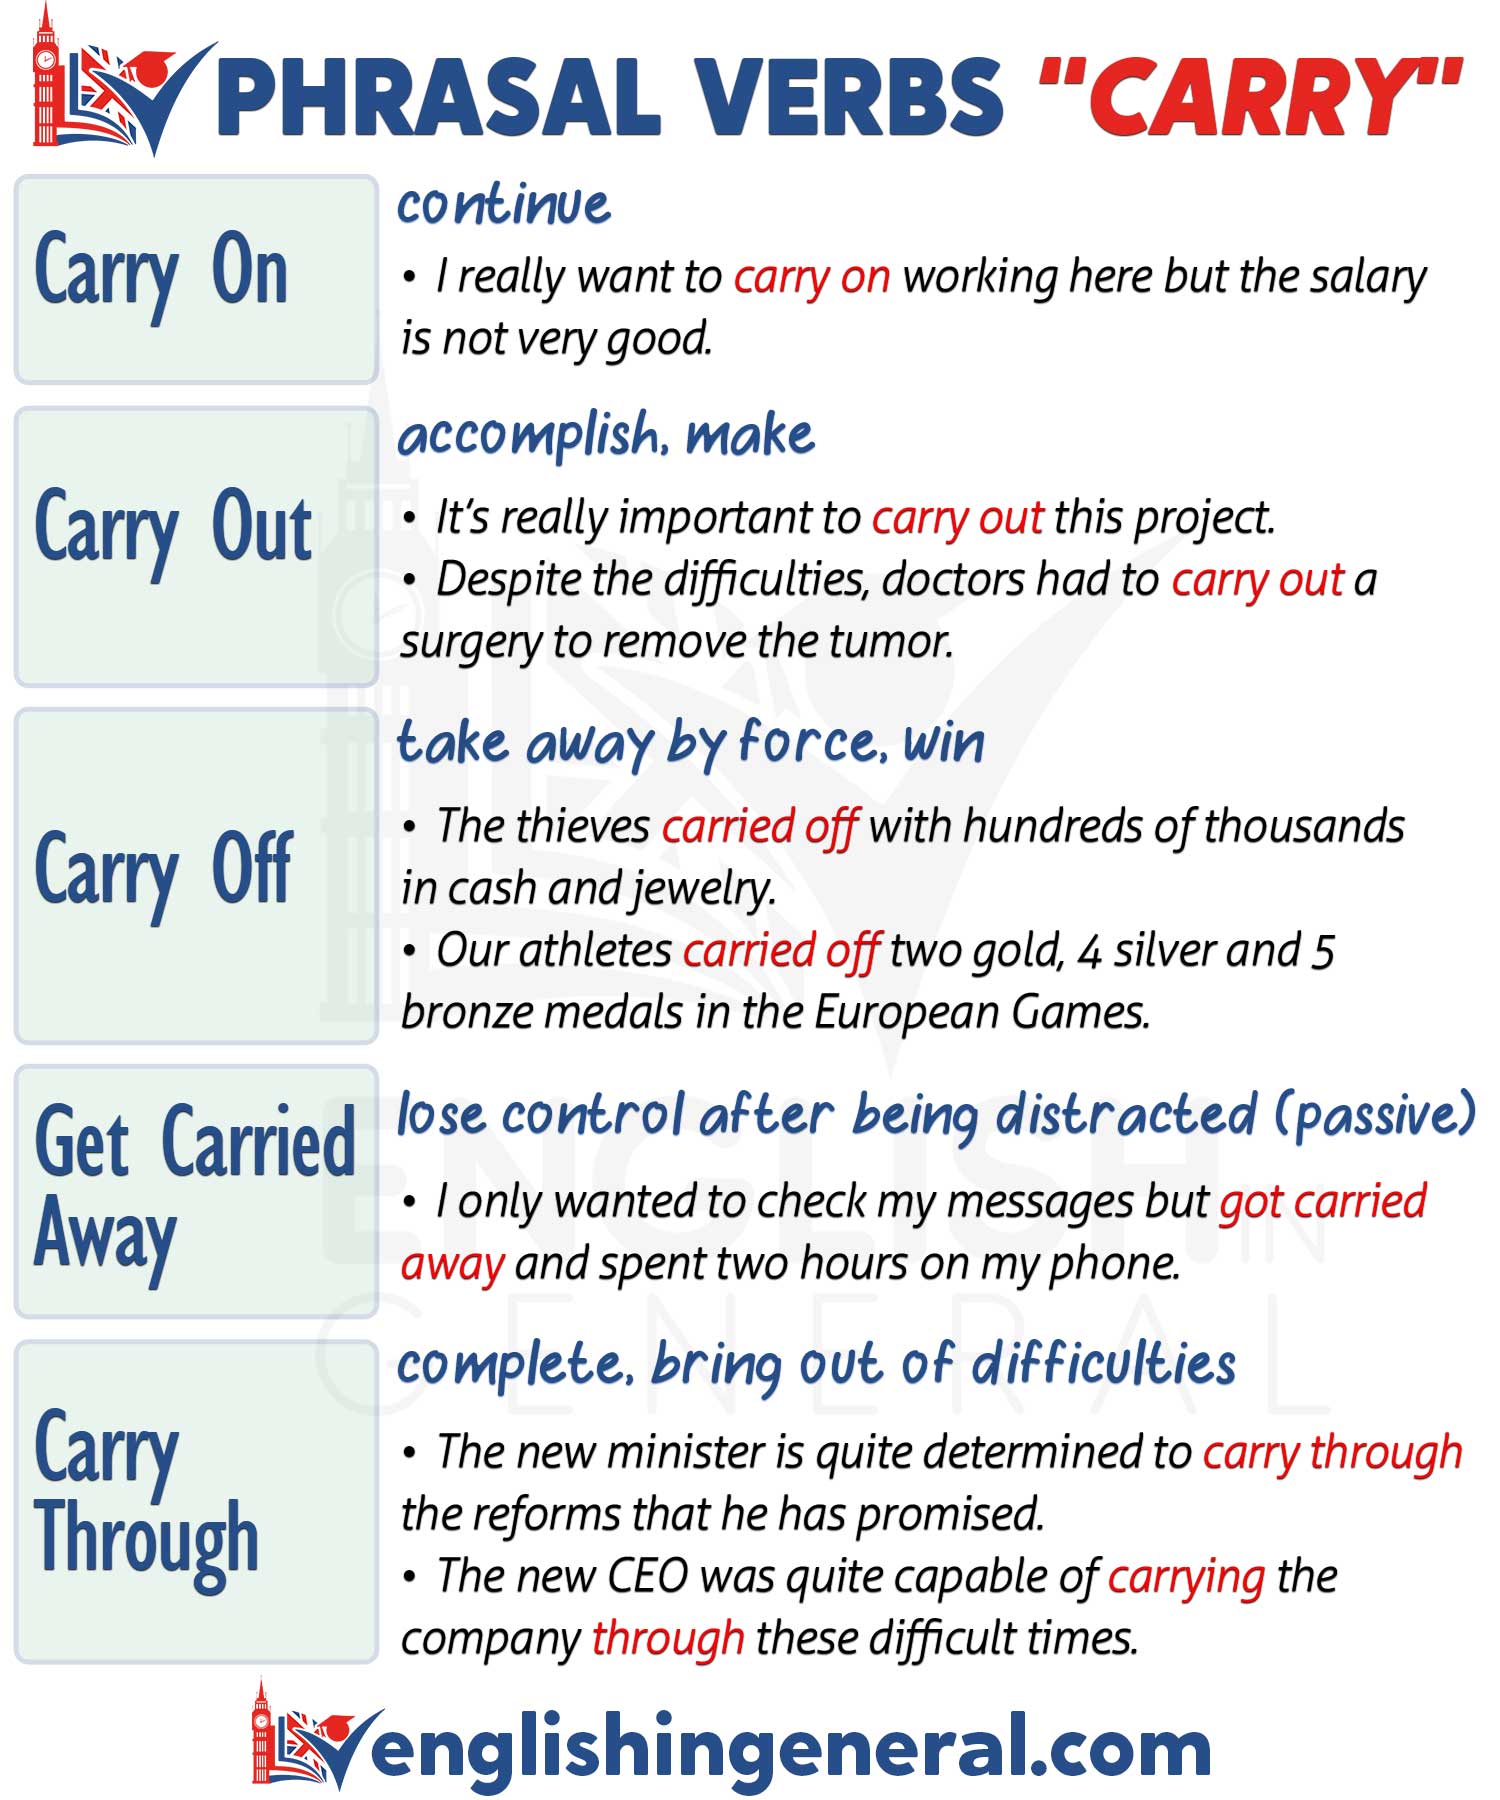 11 English Phrasal Verbs With Take, Meaning, Example Sentences